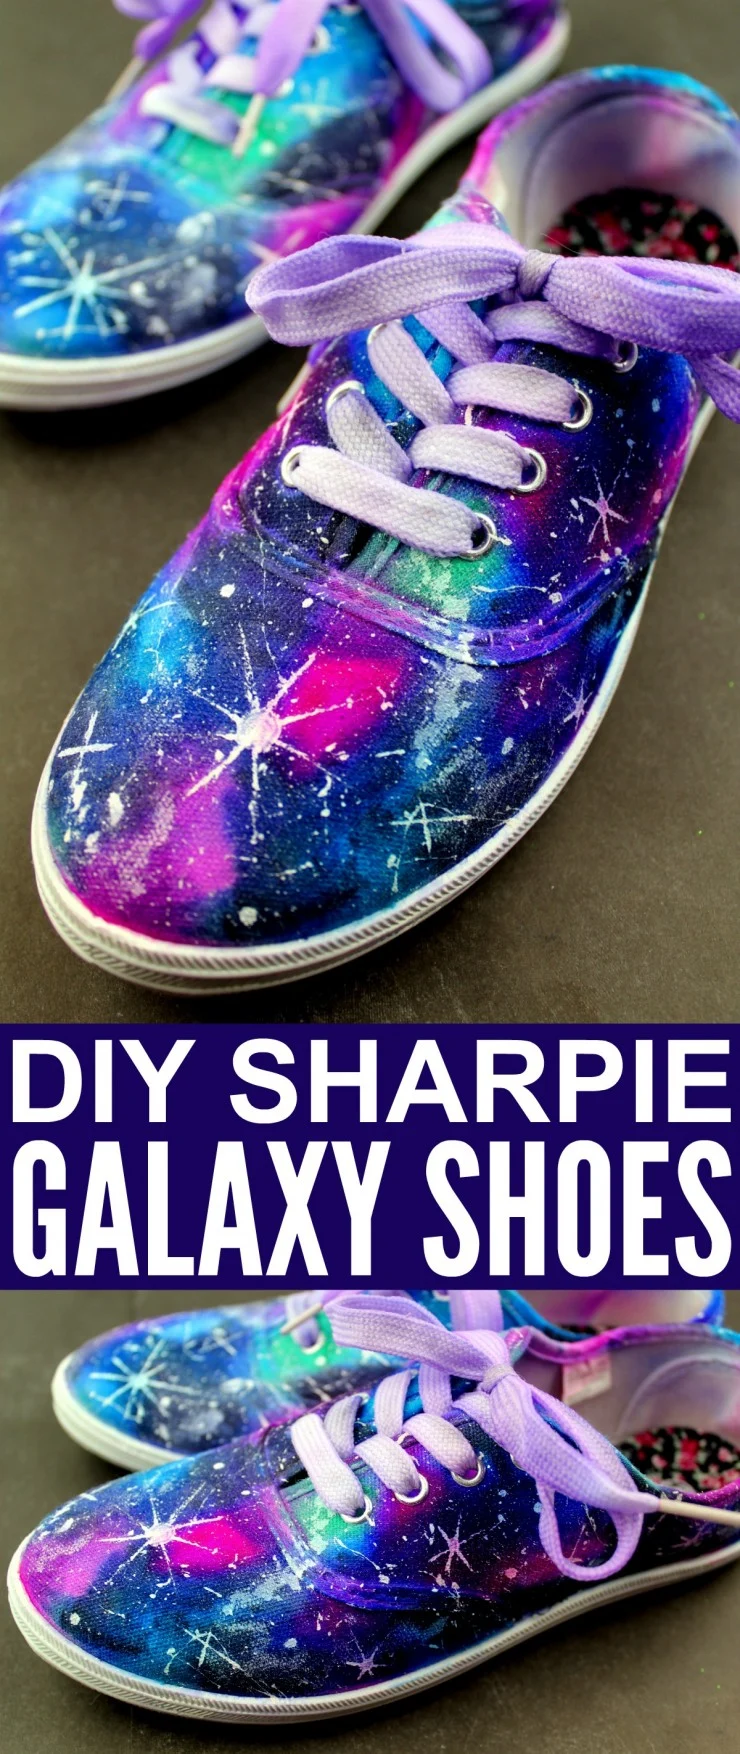 These DIY Sharpie Galaxy Shoes are a fun project you can make at home to create your own customised shoes with a look that is out of this world! 